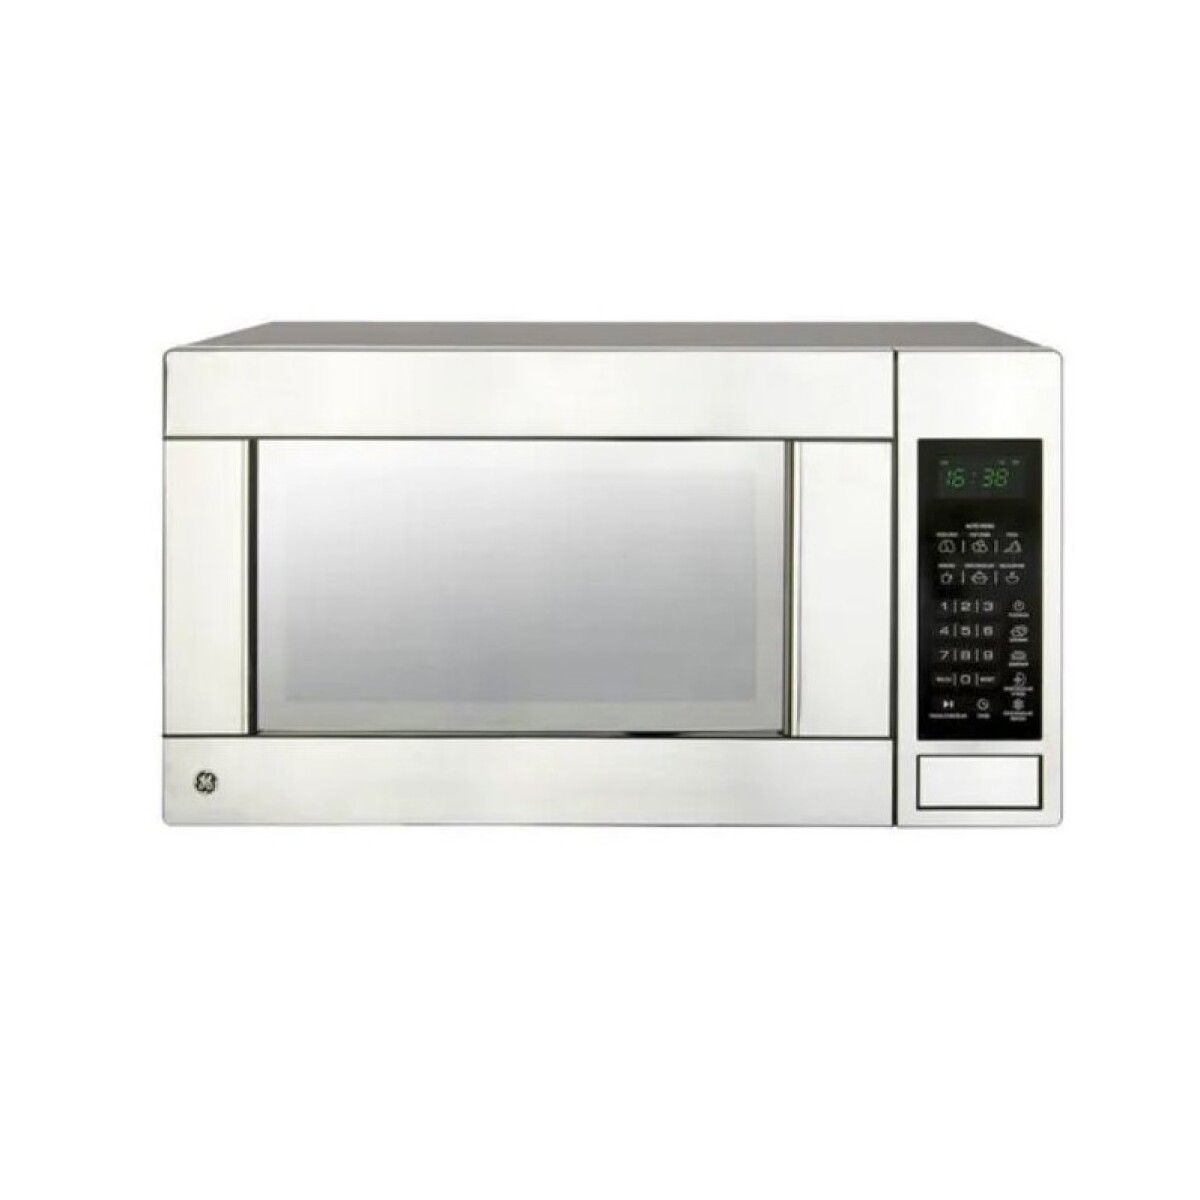 MICROONDAS GENERAL ELECTRIC 31 LTS. CON GRILL 